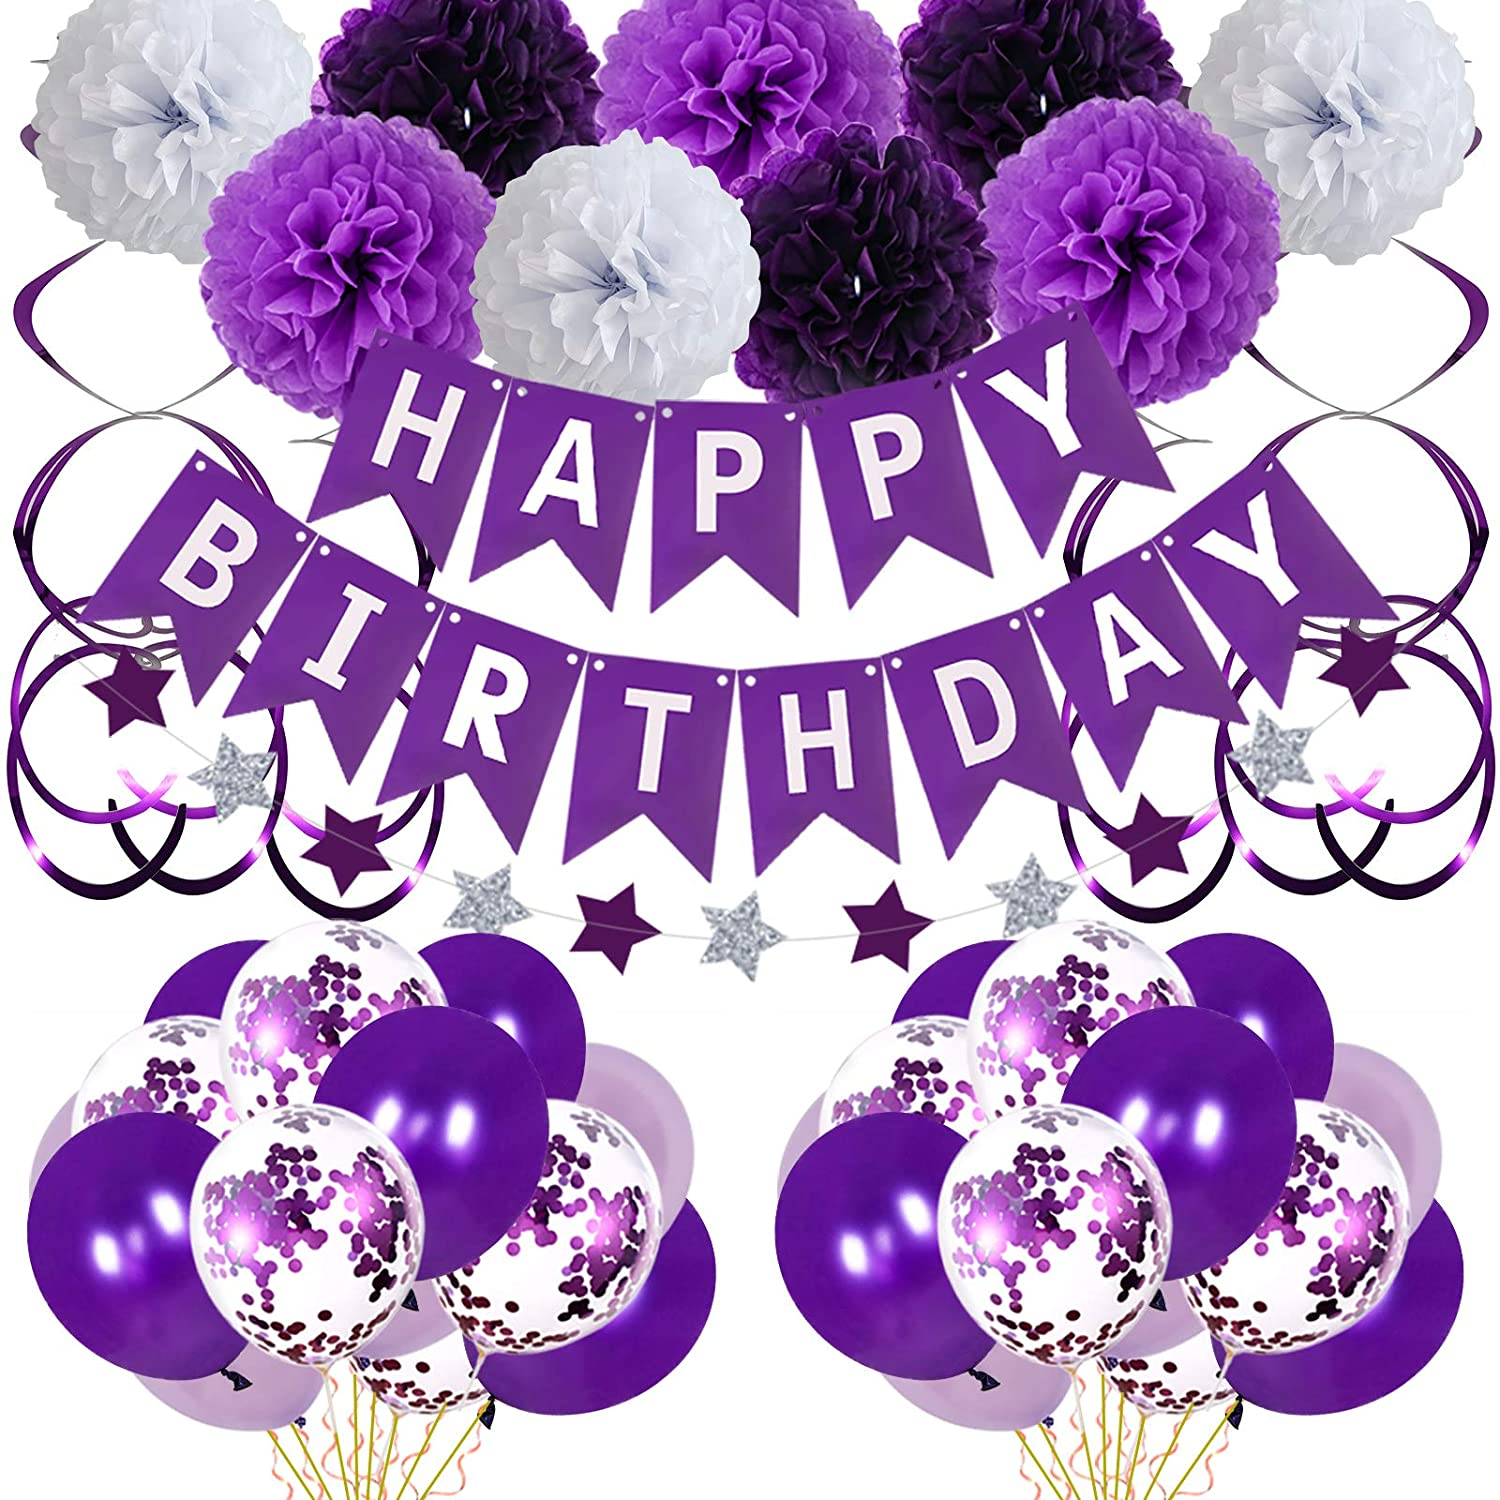 Birthday Decorations for Girls Women, Purple Party Decorations Happy Birthday Decoration with Bunting Banner, Balloons, Pompoms, Hanging Swirl for Bday Engagement Anniversary Party Decor Suit